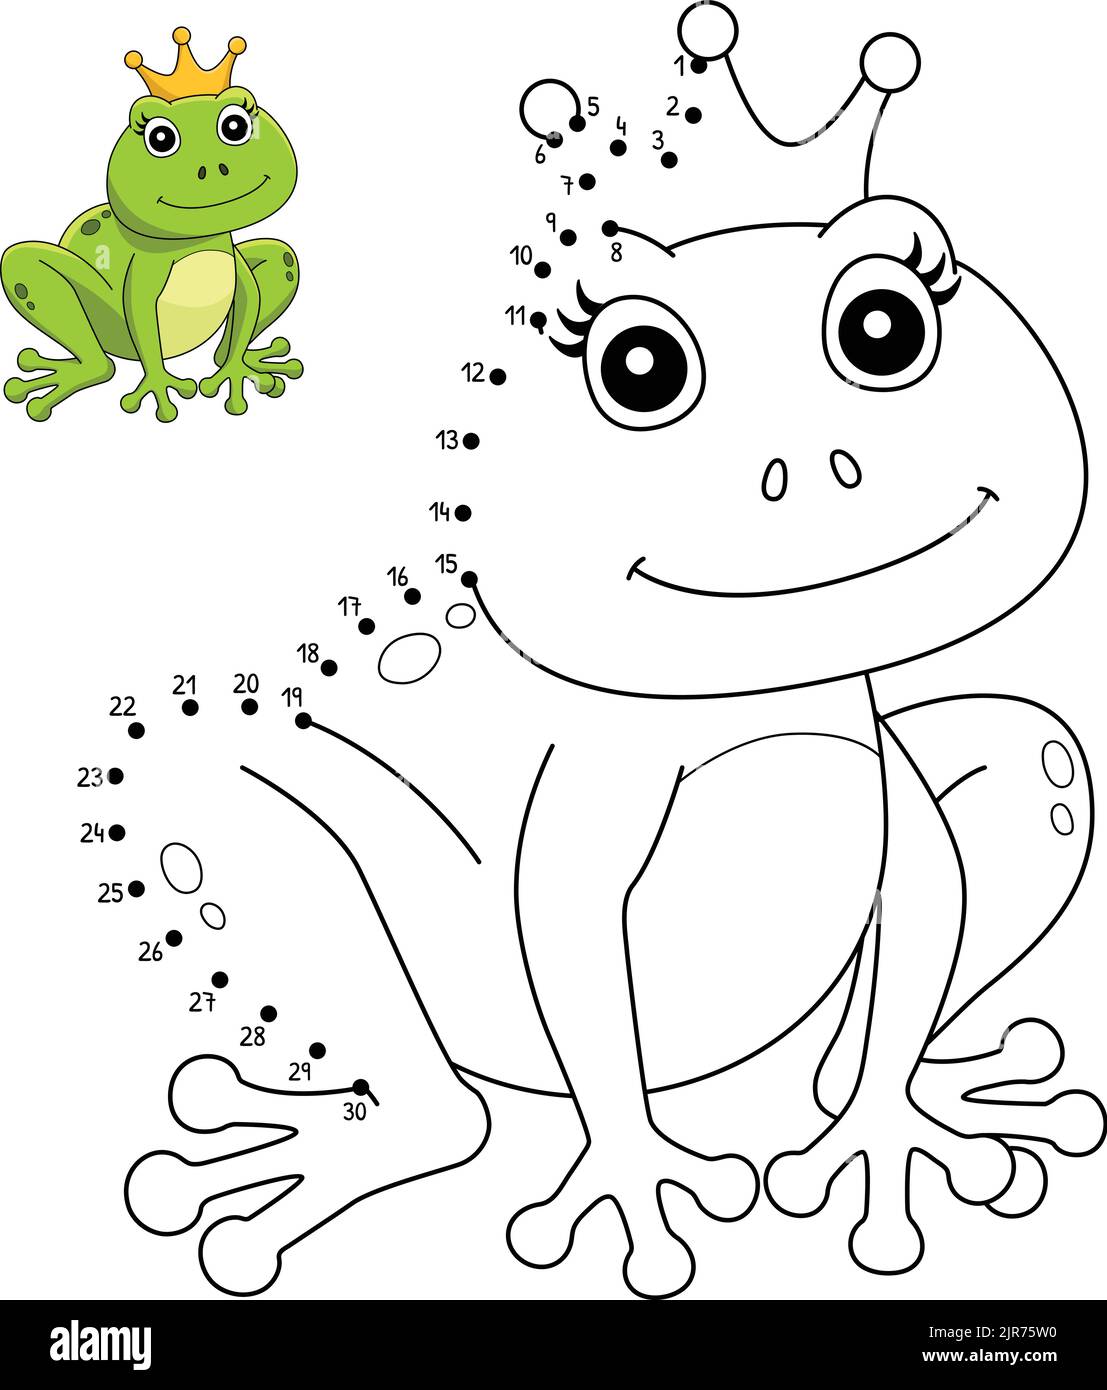 Dot to Dot Frog With A Crown Coloring Page Stock Vector